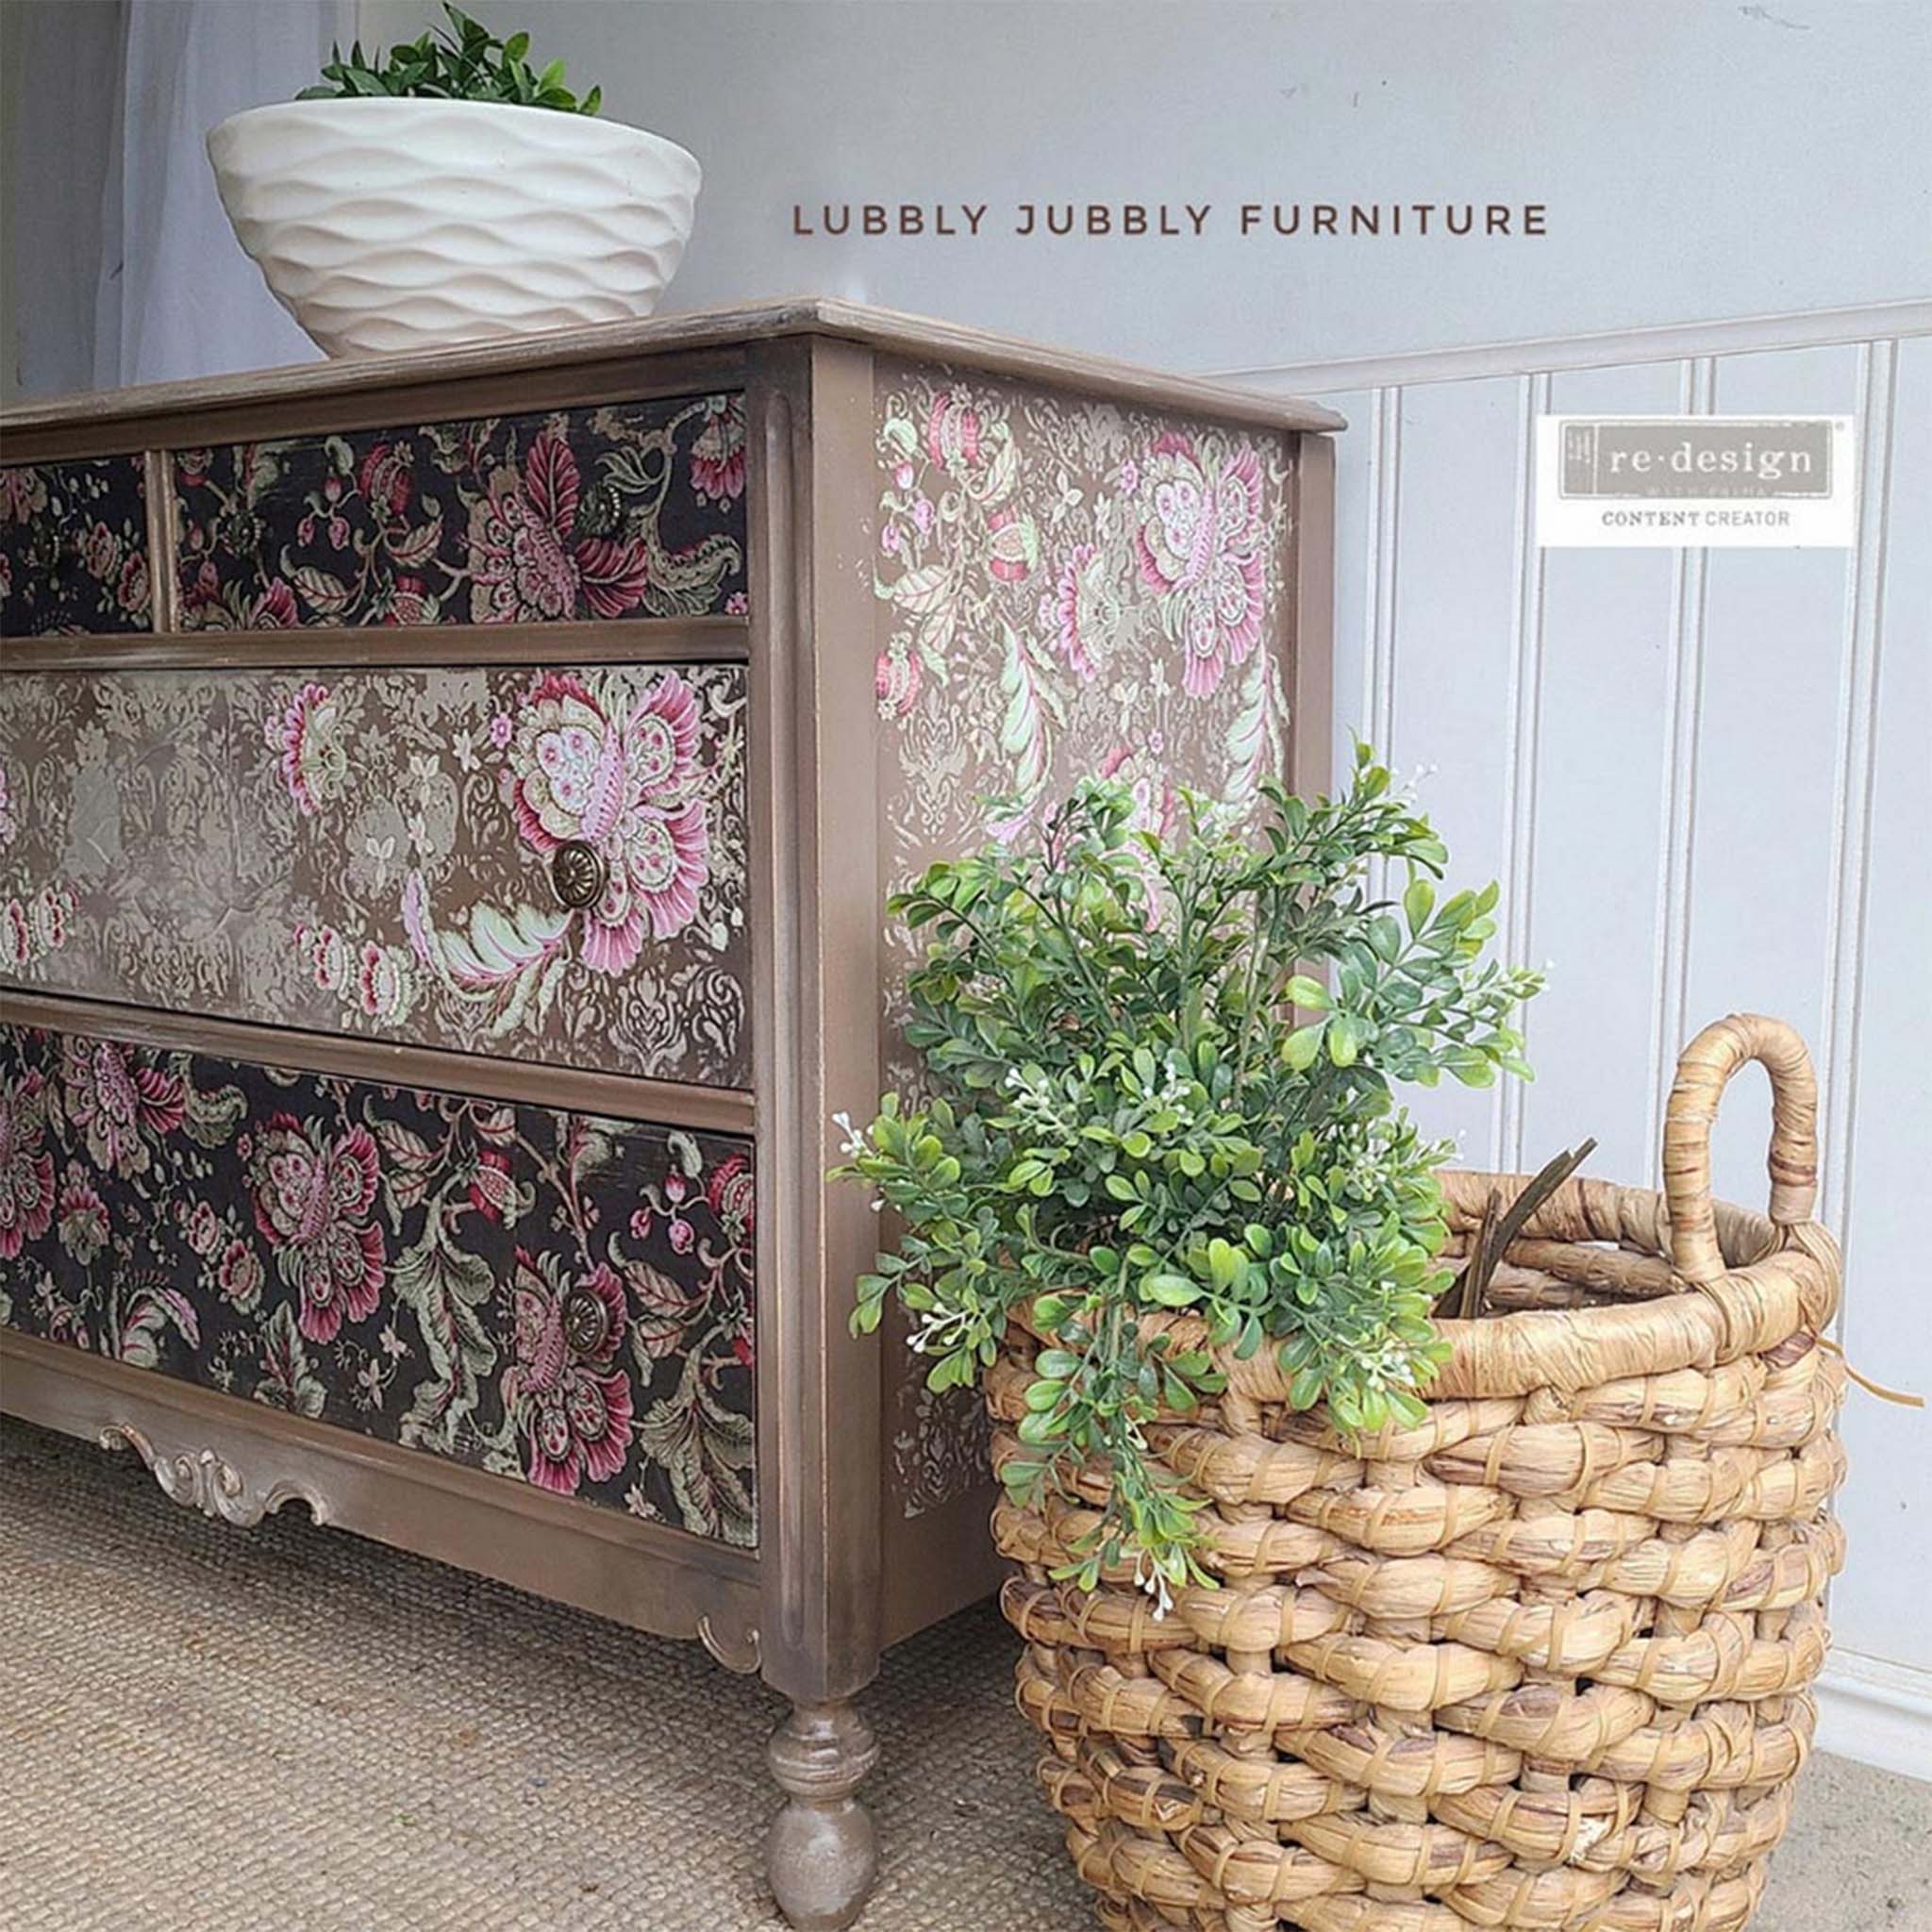 A brown 5-drawer dresser repurposed by Lubbly Jubbly Furniture, A ReDesign Ambasador, features Floral Paisley on its drawers and sides.